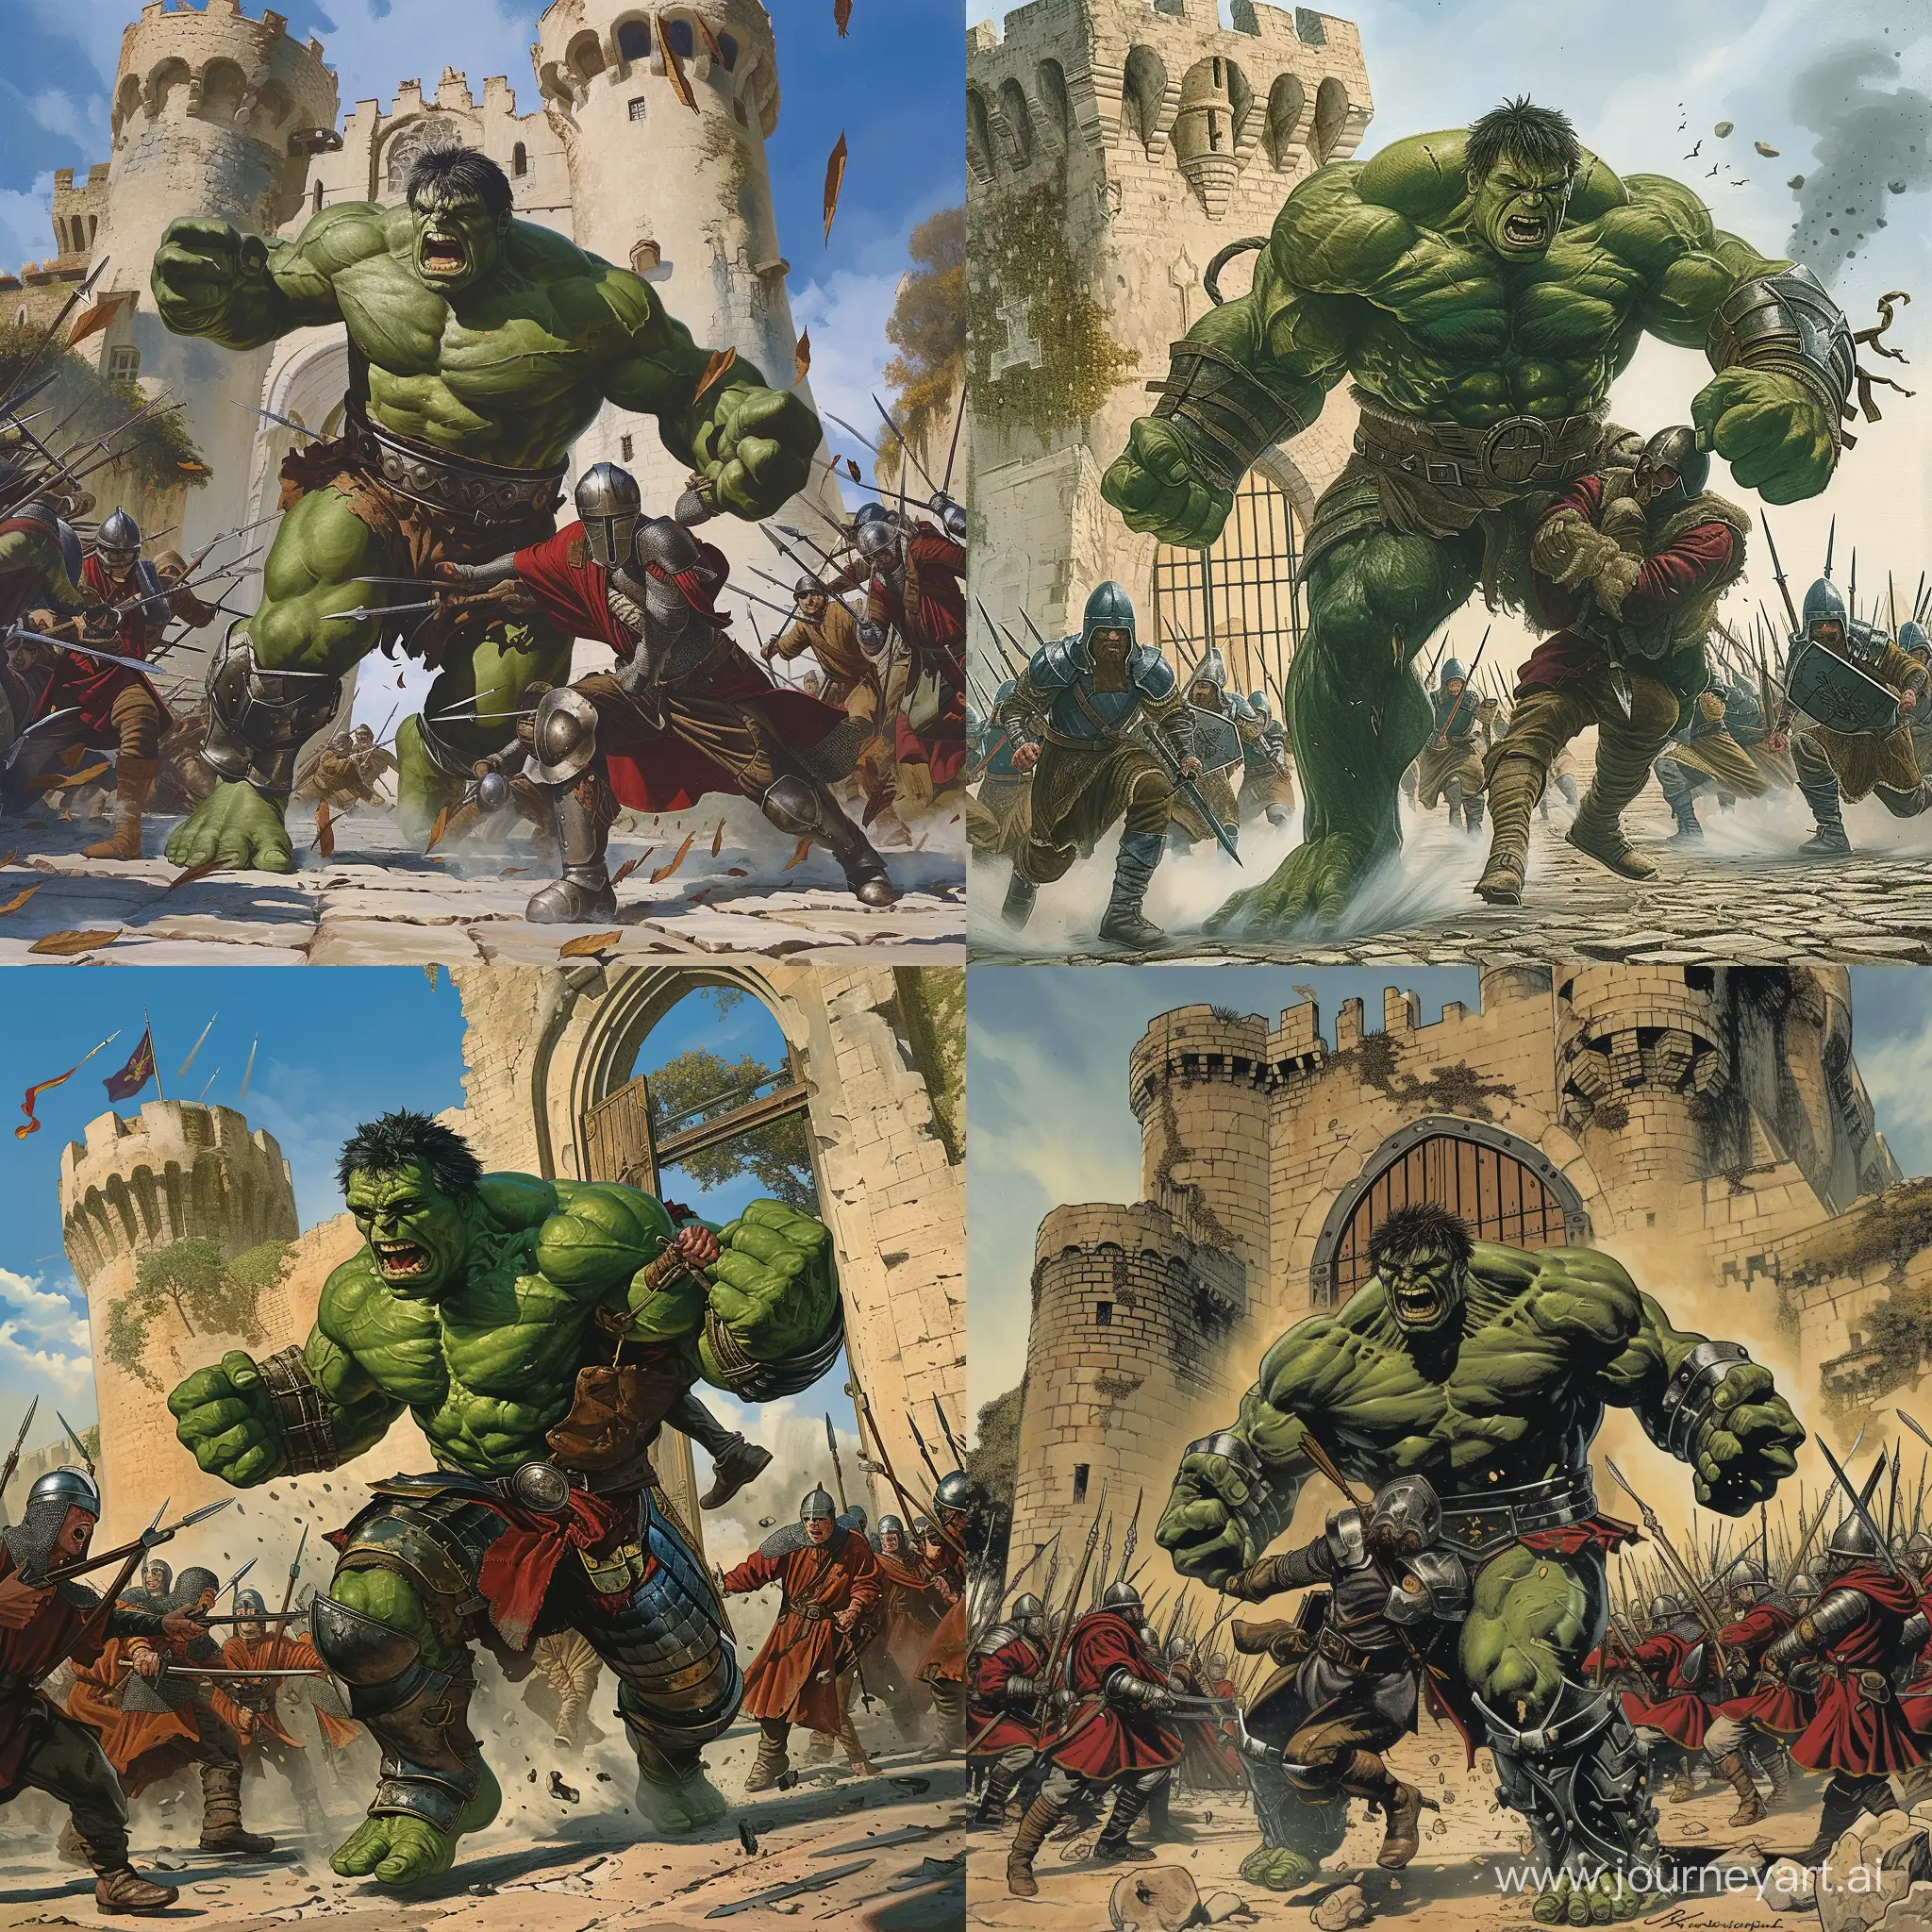 Hulk wearing medieval armor in front of a castle gate fighting a group of medieval soldiers, with Hulk carrying one of the soldiers